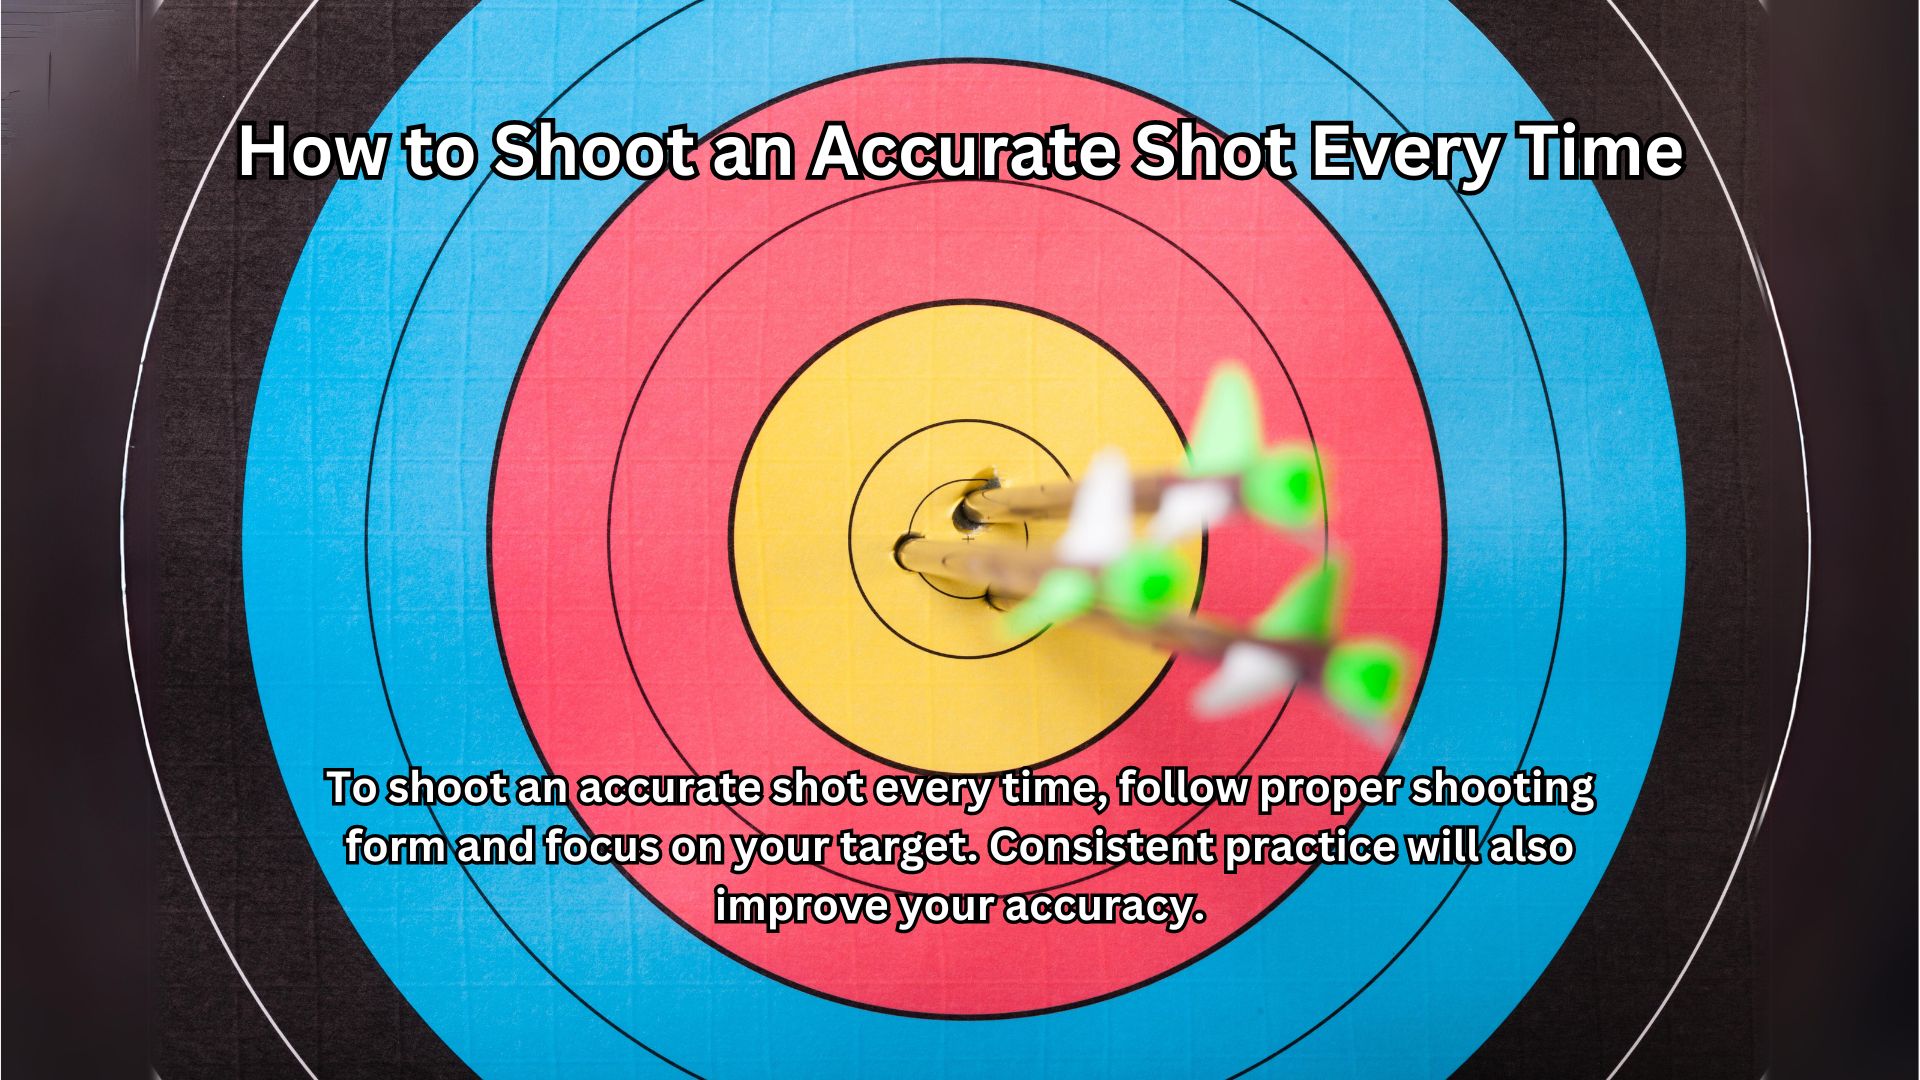 How to Shoot an Accurate Shot Every Time